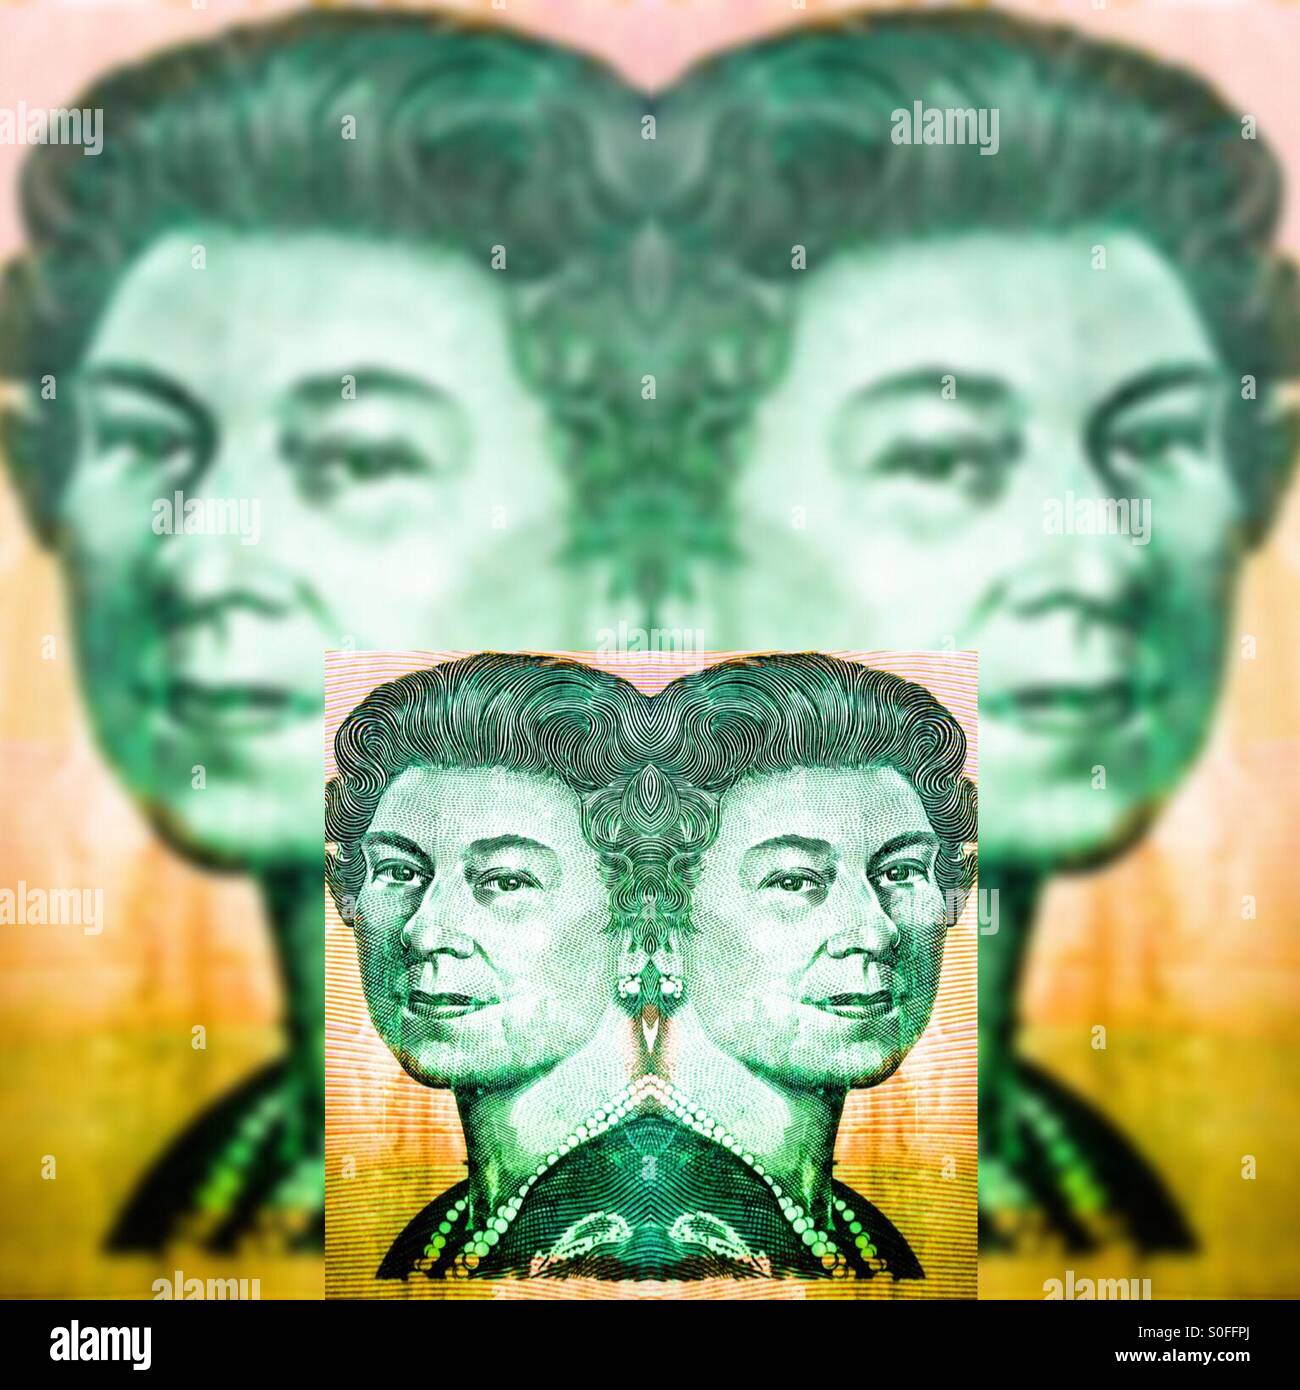 Queen Elizabeth II on Australian currency with mirror reflection effect Stock Photo